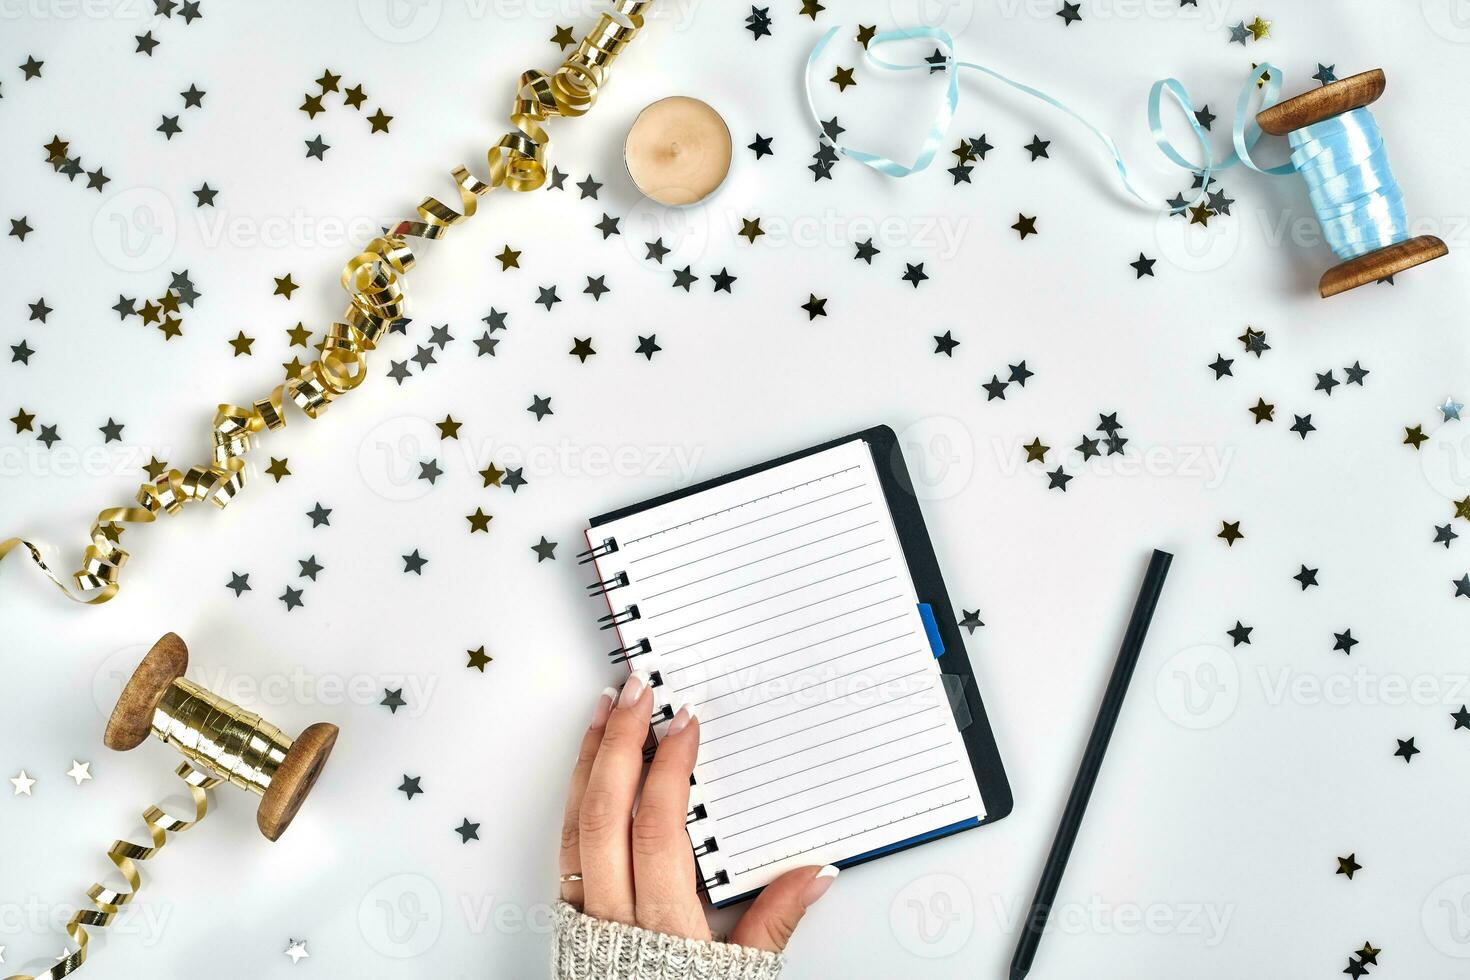 Festive decorations, delicate wavy ribbons, metallic star shaped confetti and notebook with wish list on white table, flat lay style. Christmas holidays decoration concept. photo